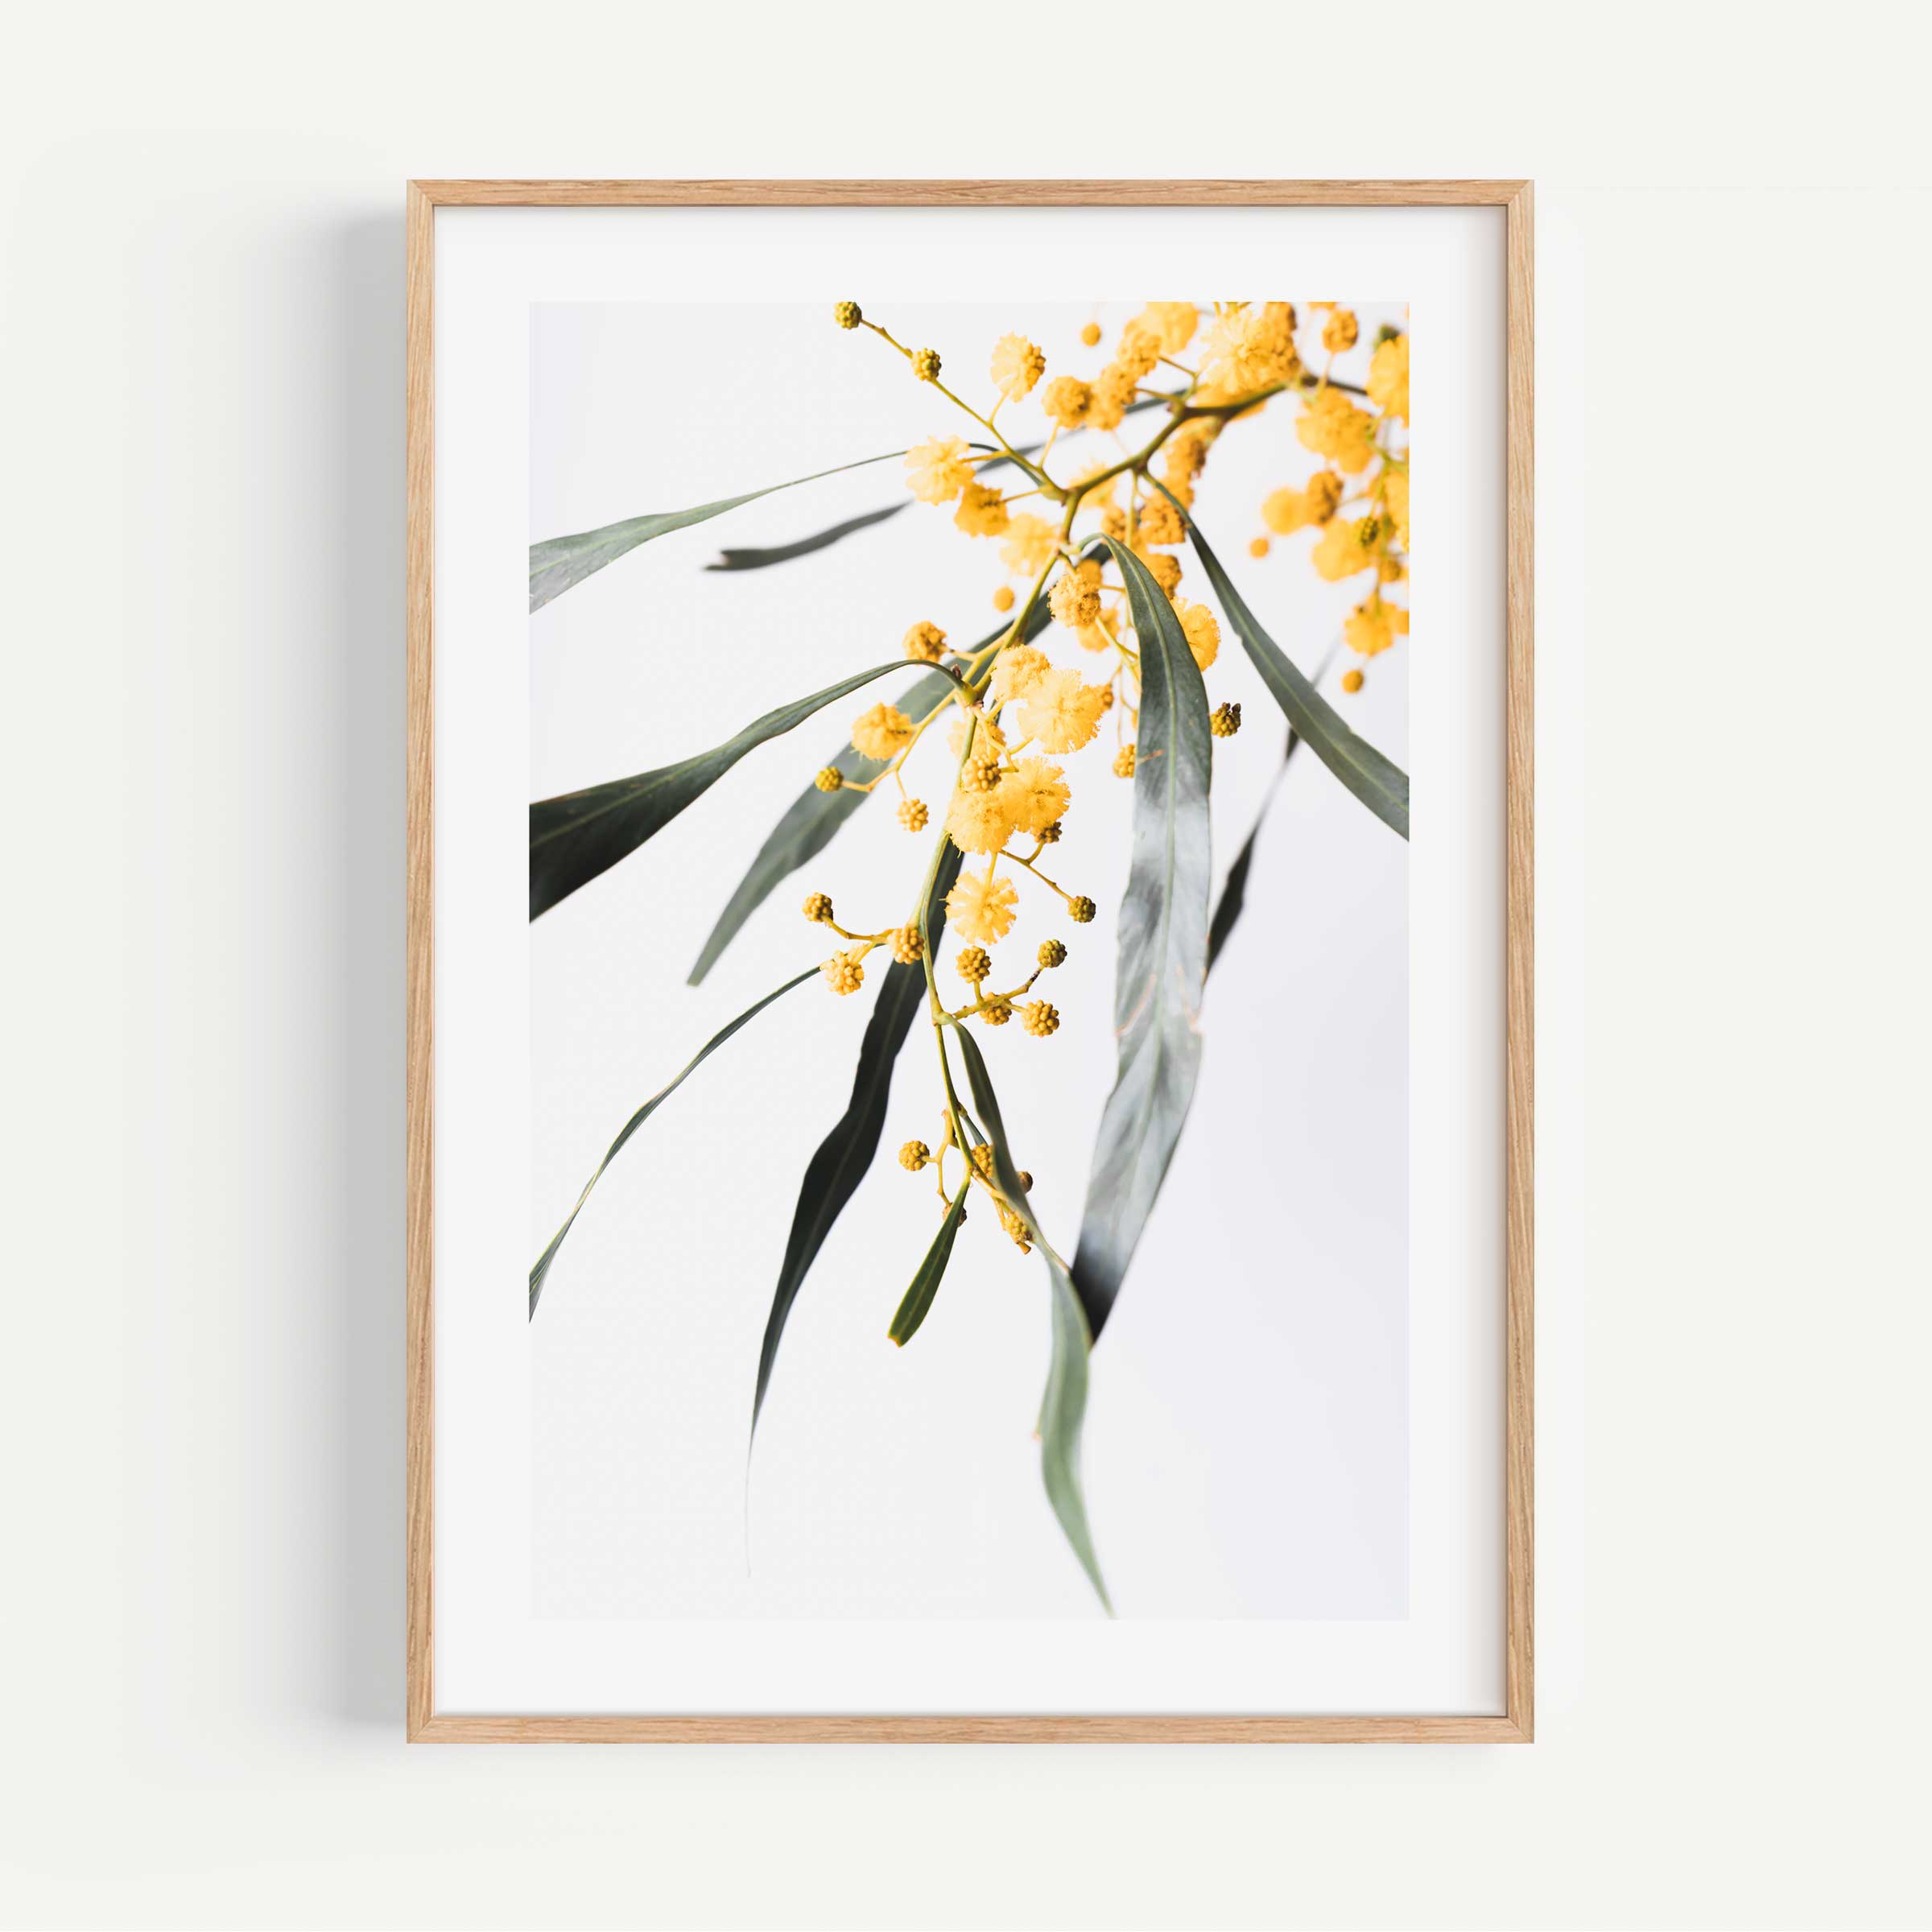 Golden Wattle Bloom: Display the natural splendor of Sydney's flora with this framed wall art featuring the iconic Golden Wattle Flower.